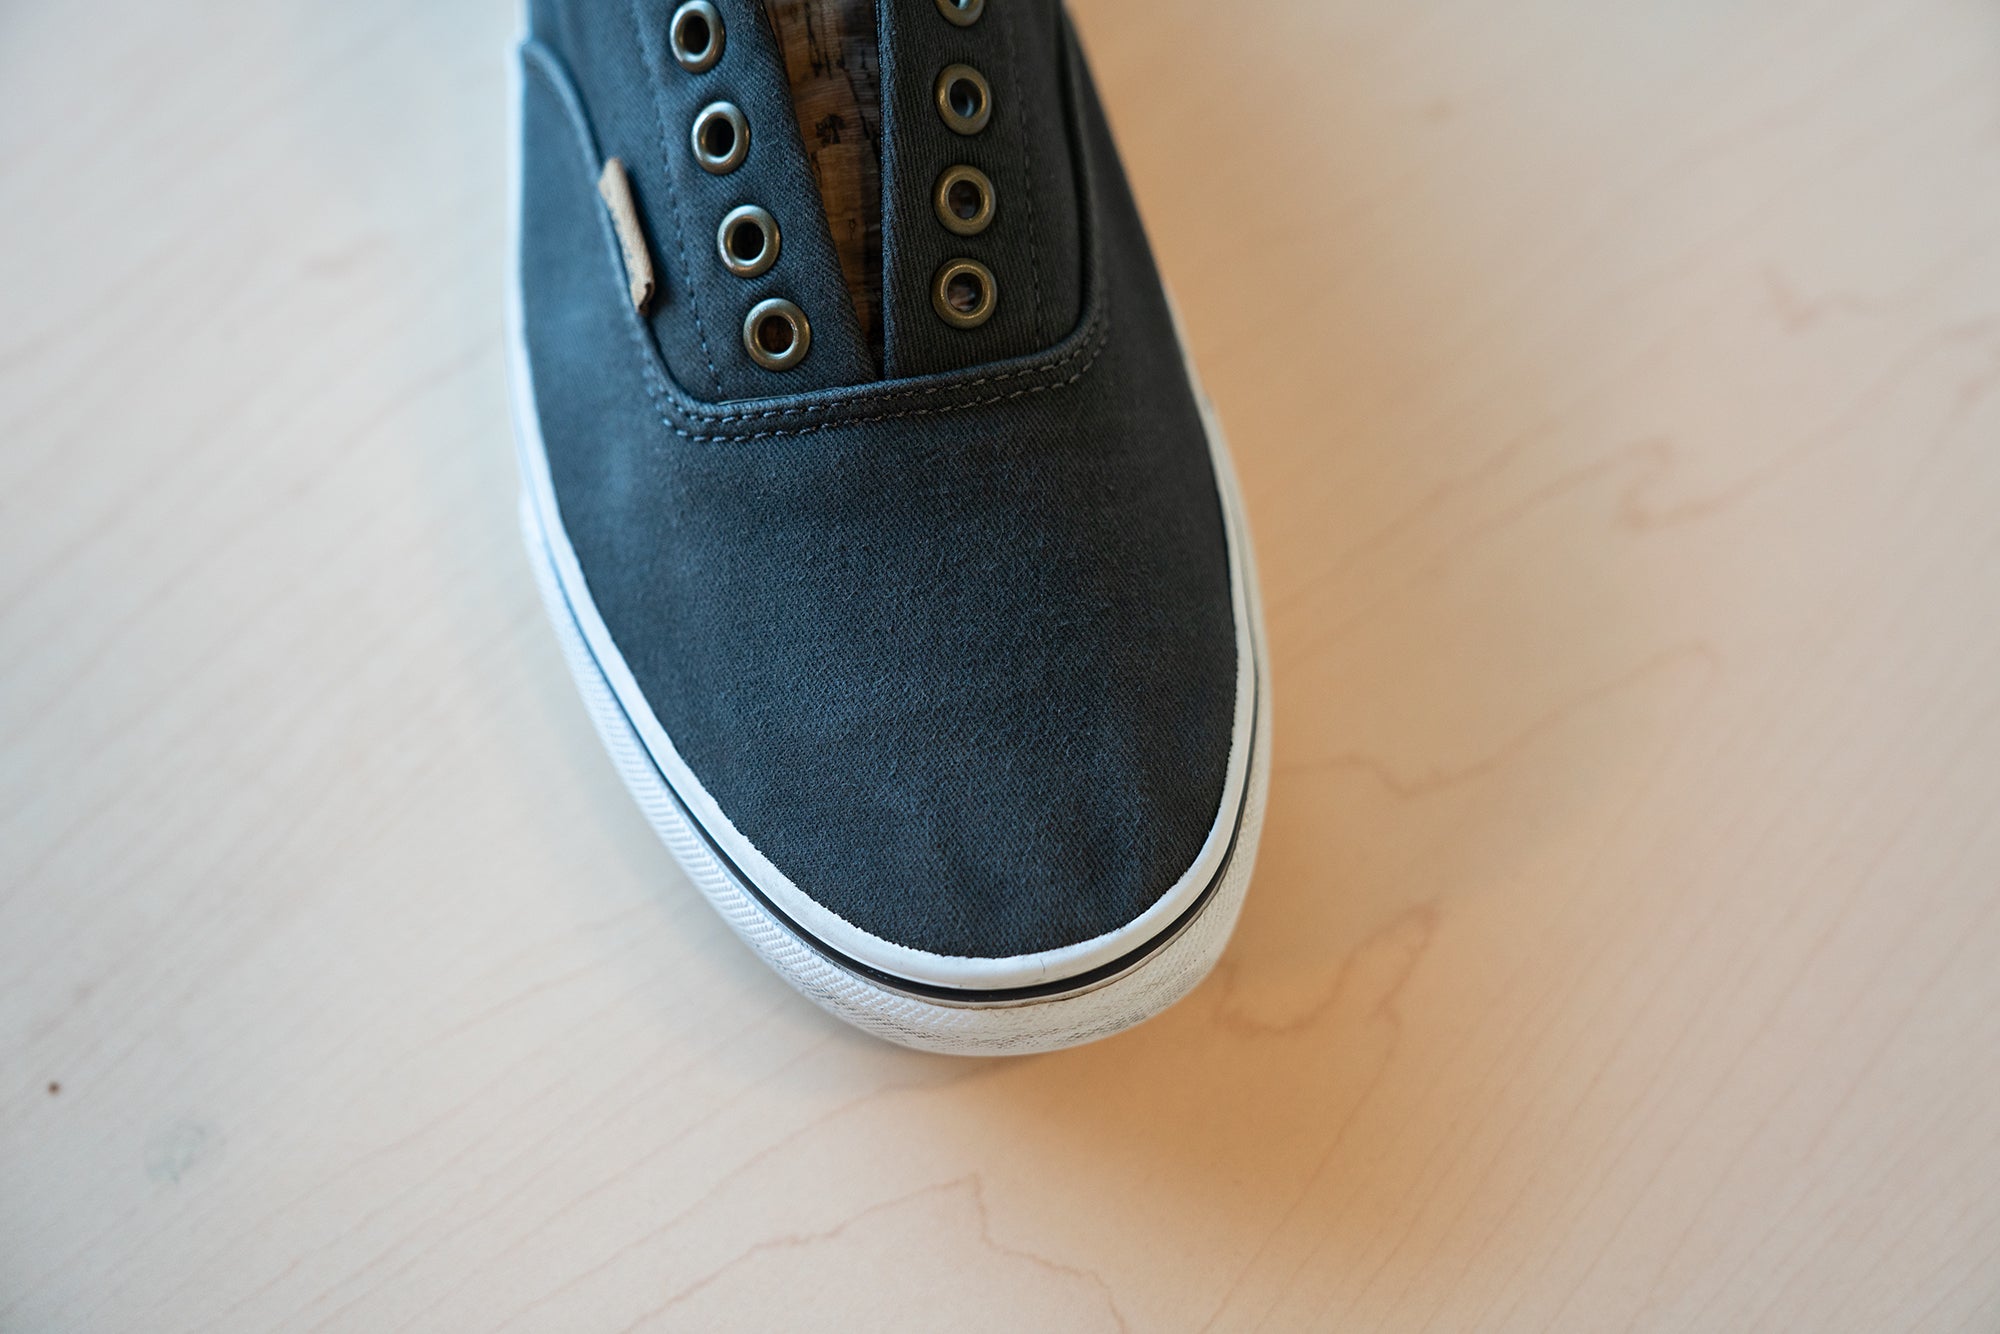 How to Removed Chocolate Stains from Canvas Vans